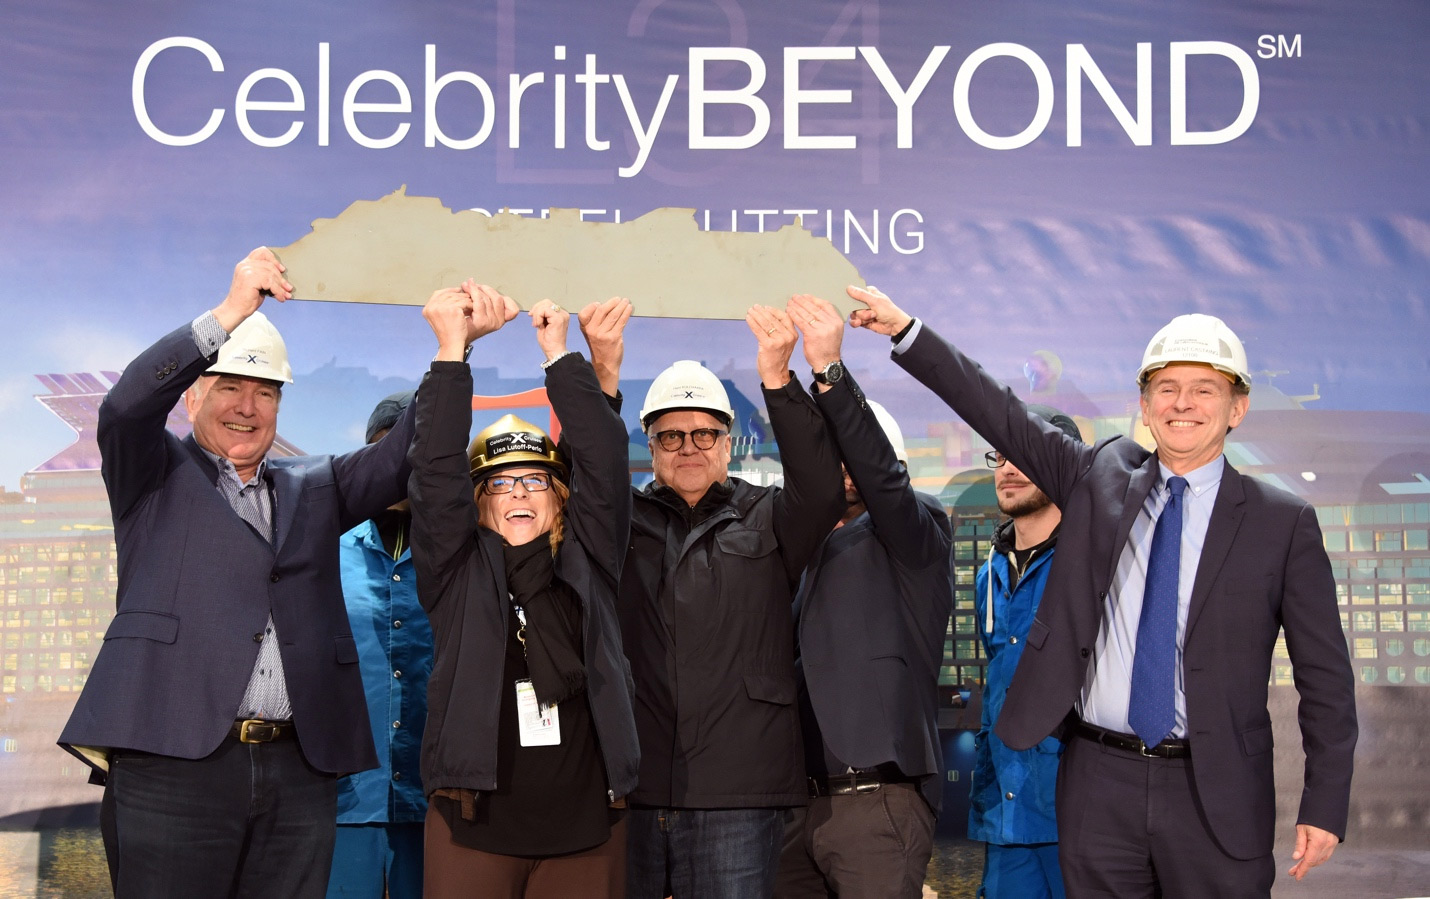 Royal Caribbean Cruises Ltd. and Chantiers de l’Atlantique executives raising the signed commemorative ship cut-out at the ceremonial steel-cutting for Celebrity Beyond, coming fall 2021. (From left to right: Richard D. Fain, Chairman and CEO, RCCL; Lisa Lutoff-Perlo, President and CEO, Celebrity Cruises; Harri Kulovaara, Executive Vice President, Maritime and Newbuilding, RCCL; and Laurent Castaing, General Manager, Chantiers de l’Atlantique)